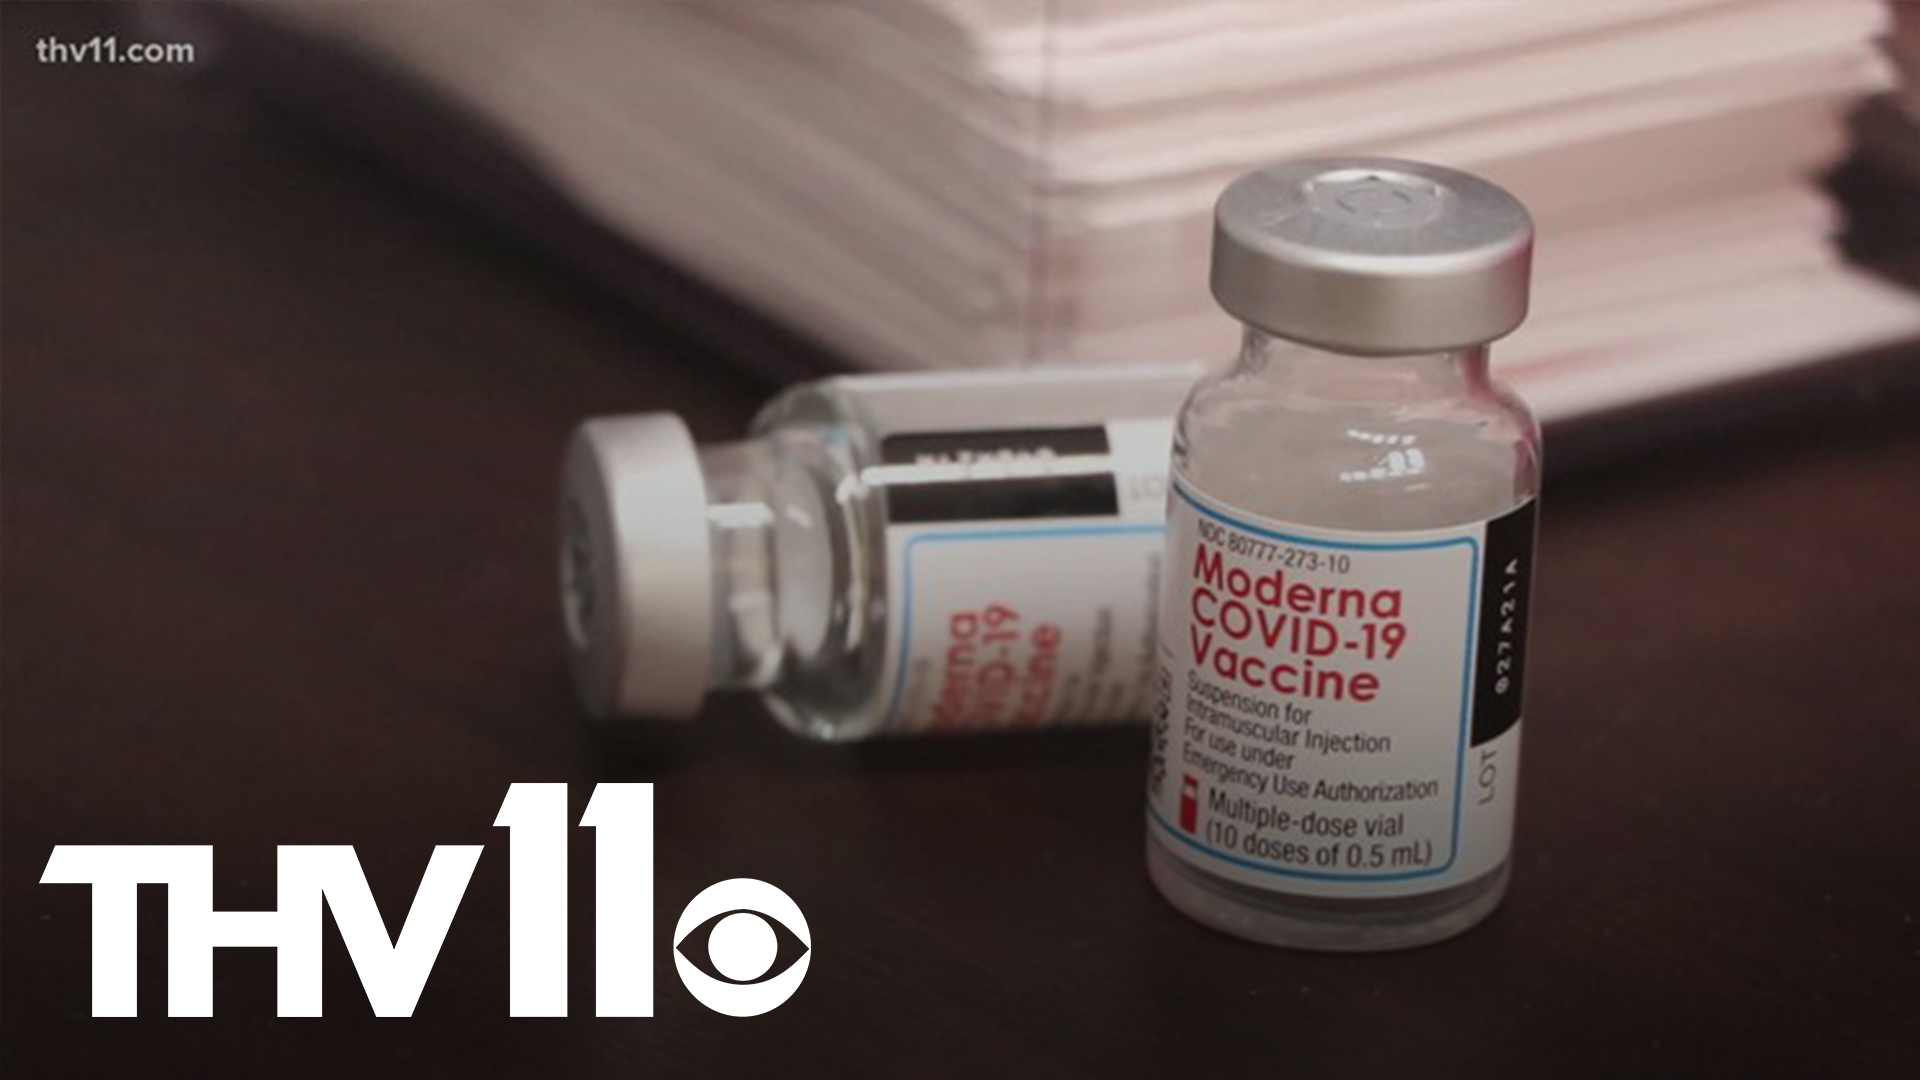 A team of researchers at UAMS and Arkansas Children's are trying to figure out what true proportion of people have a severe allergic reaction to the vaccine.